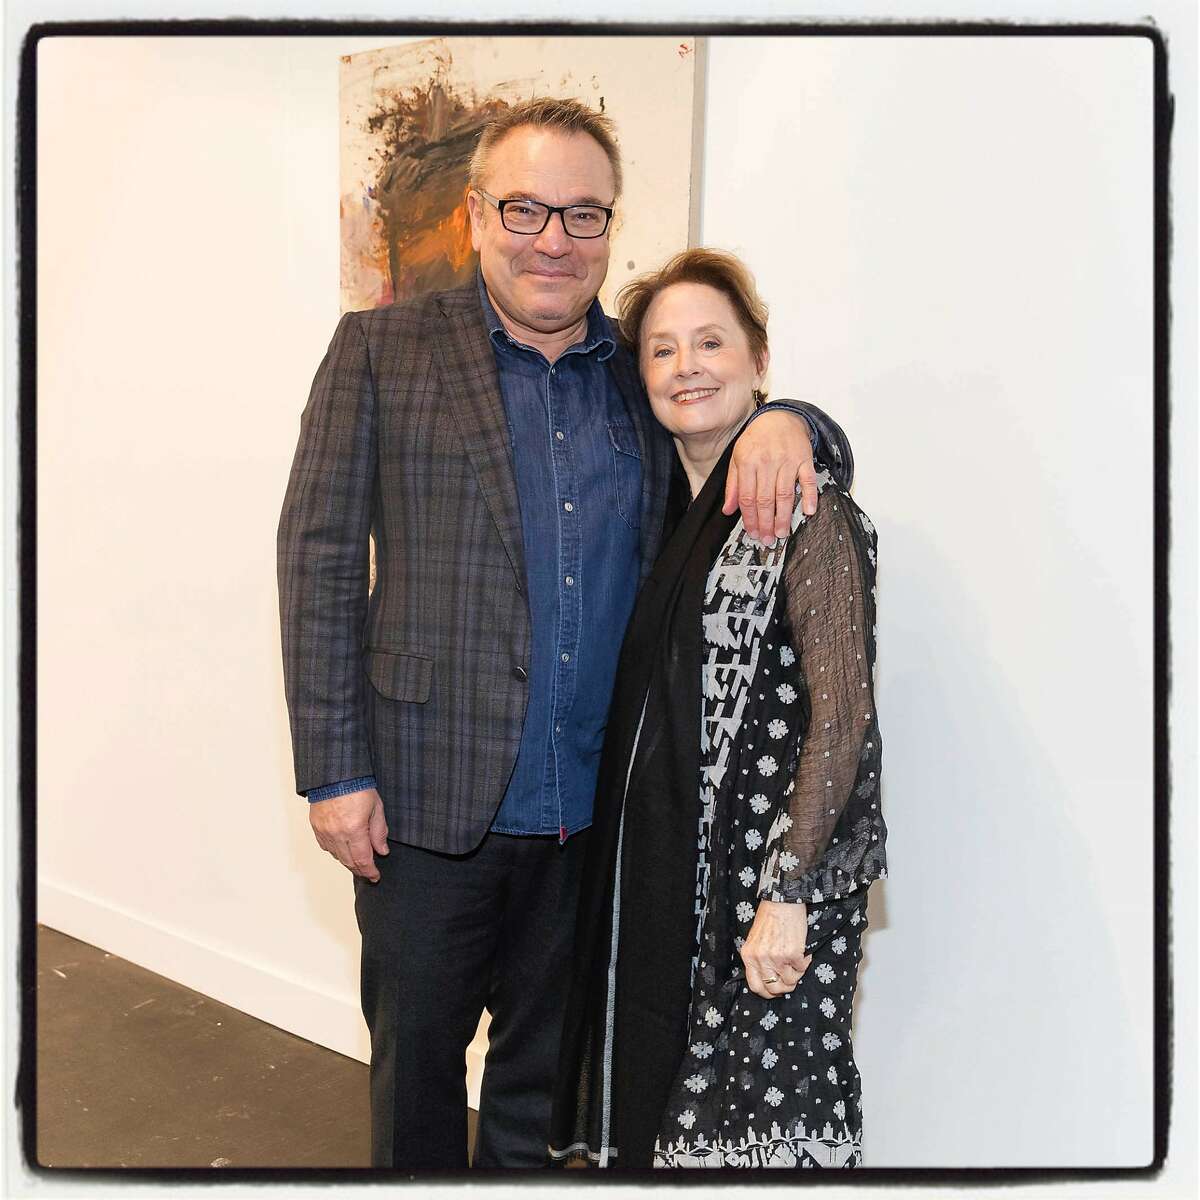 FOG mastermind Stanlee Gatti and Innovator honoree Alice Waters at the art-design fair. Jan. 11, 2018.